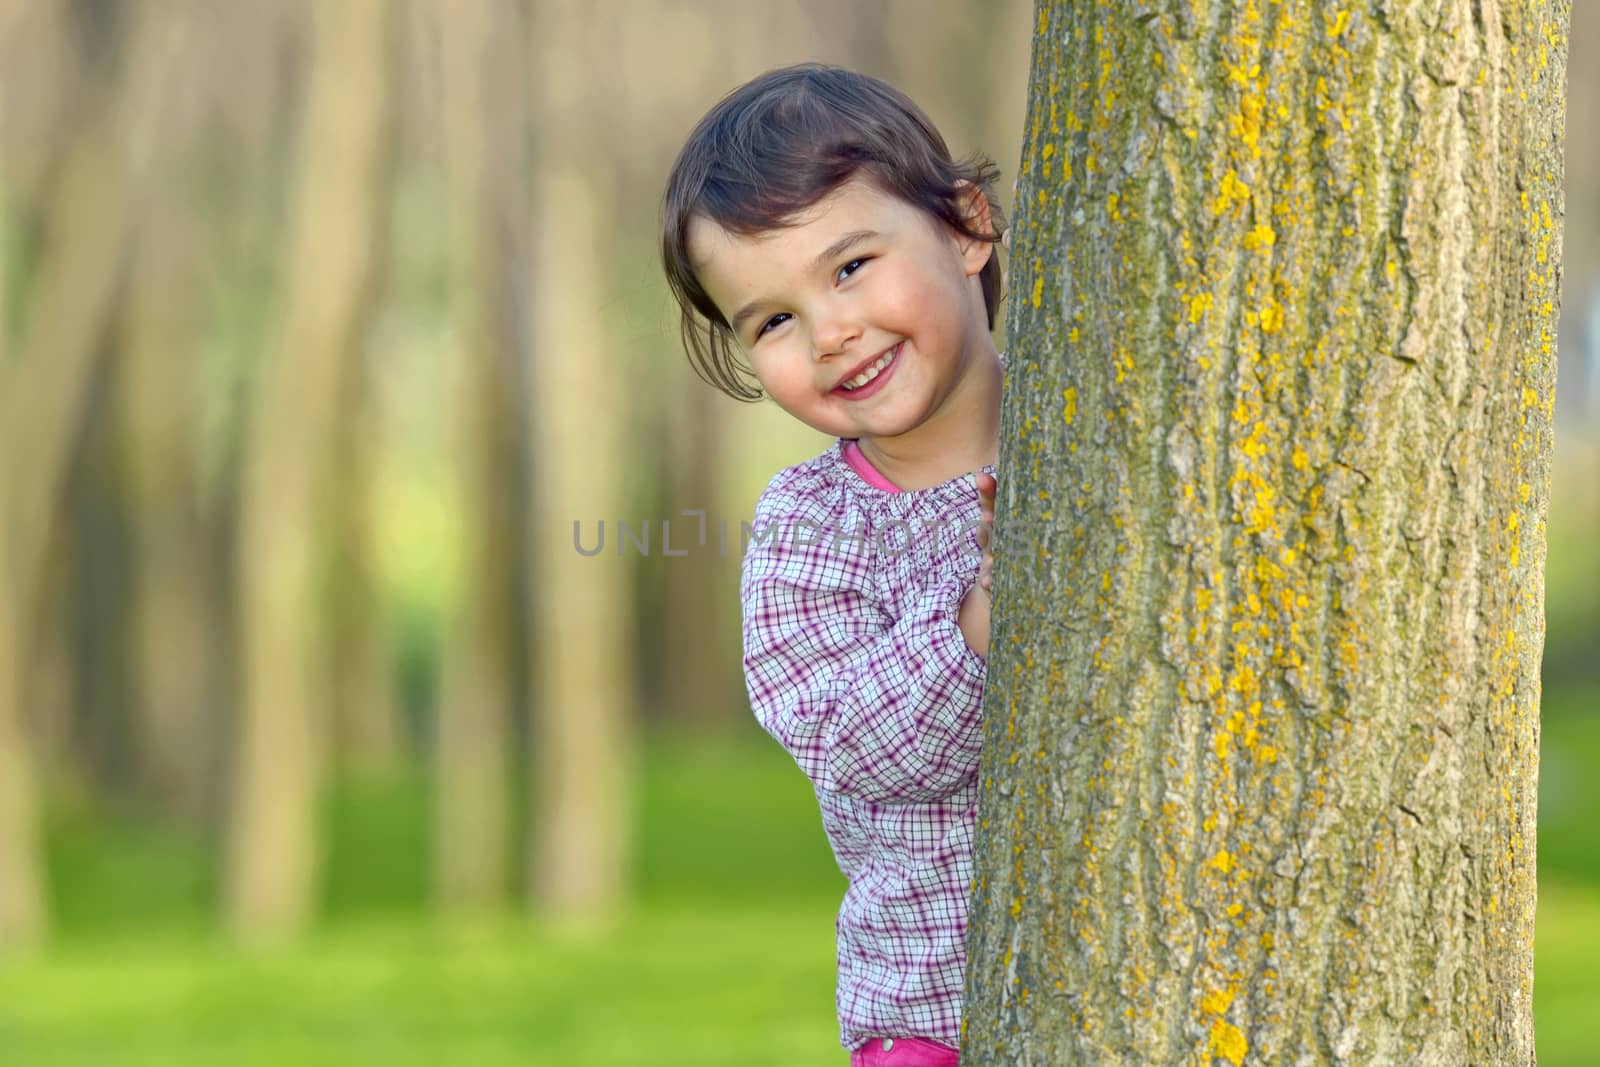 Little girl hiding behind a tree in a forest